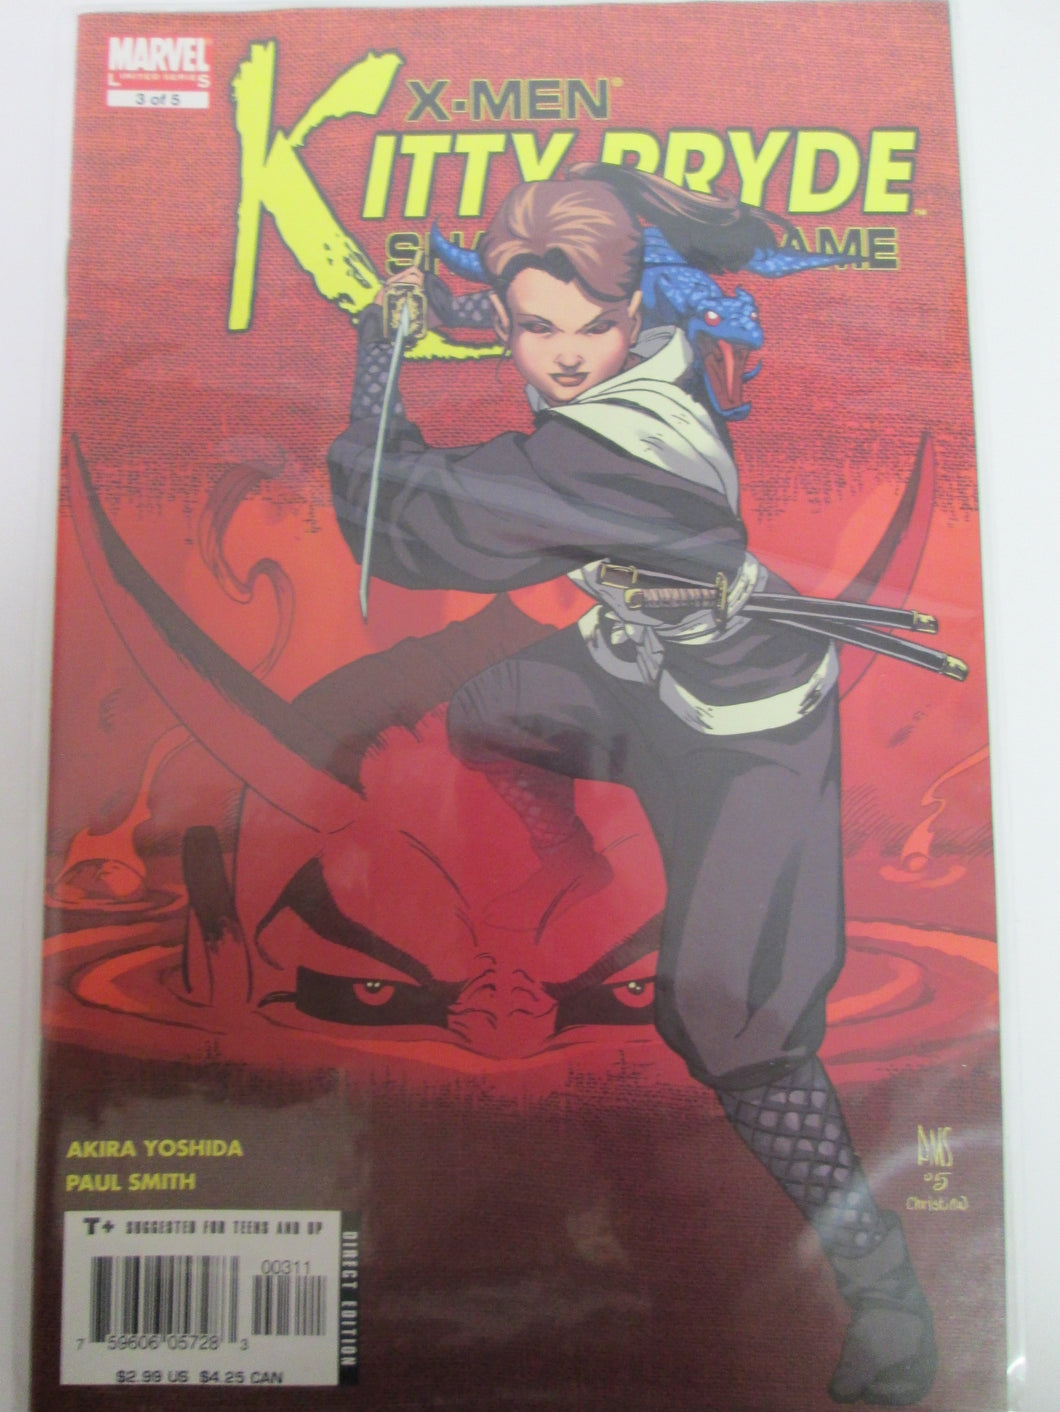 X-Men Kitty Pryde Shadow & Flame # 3 (Marvel)